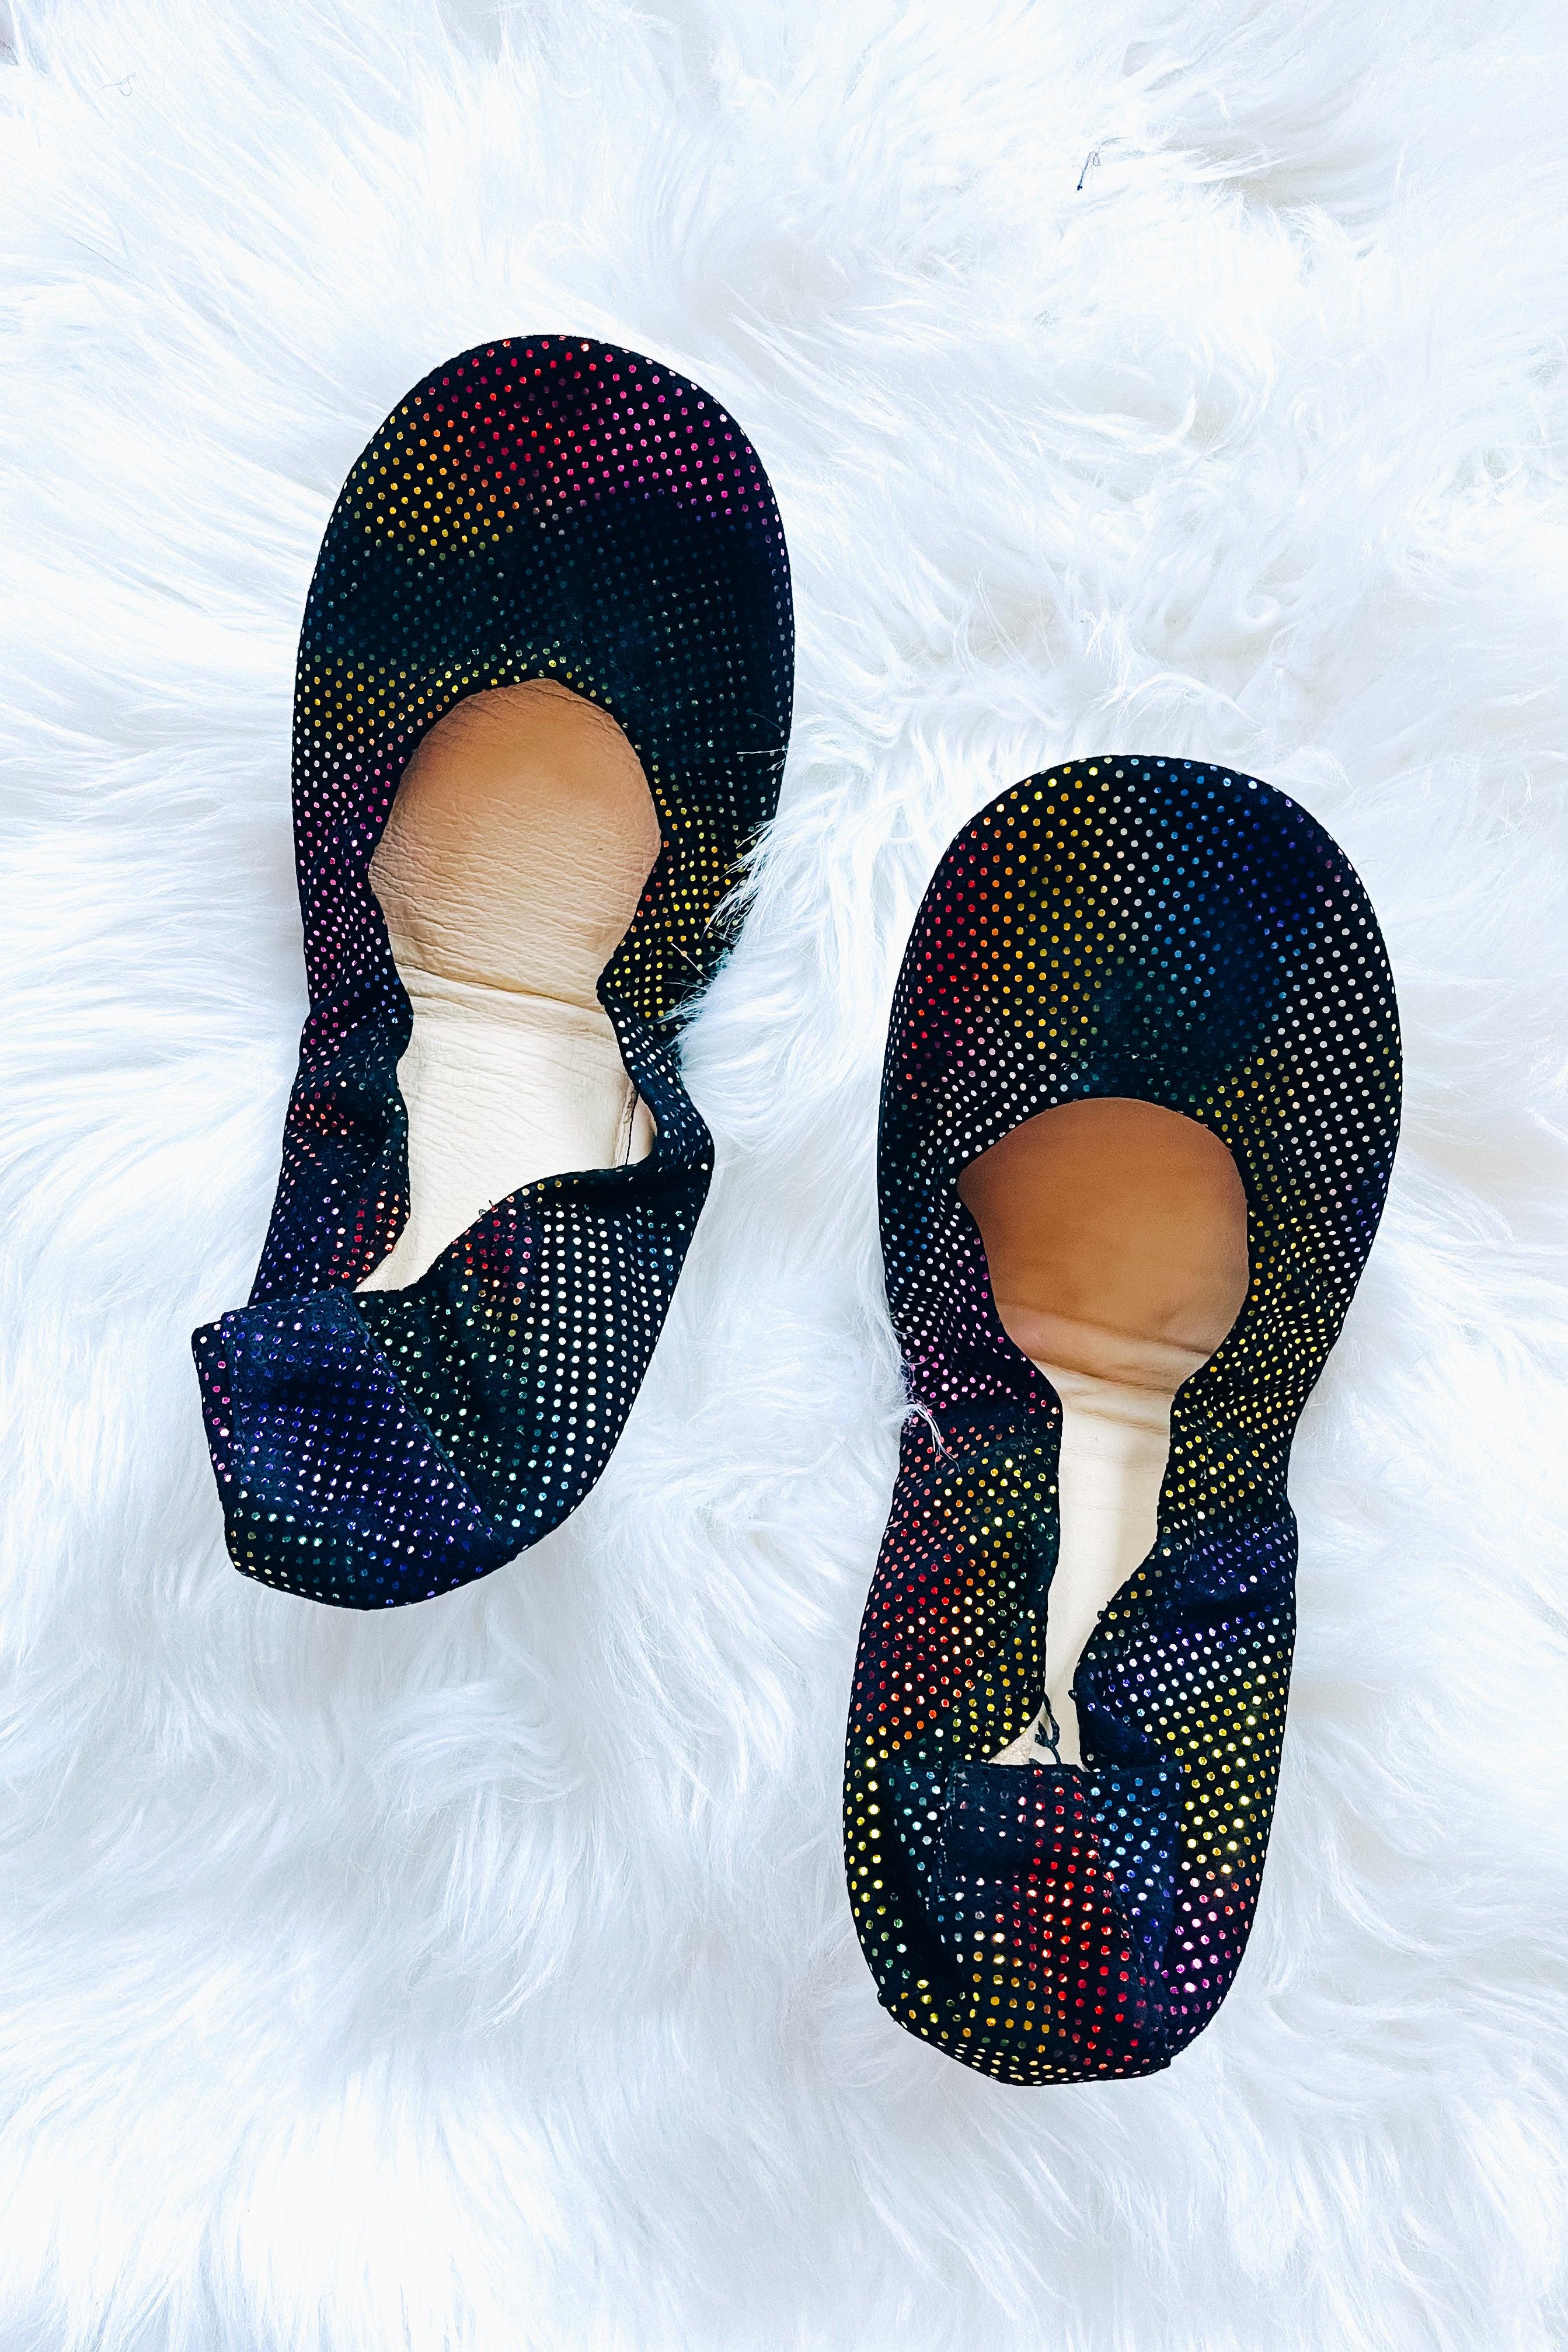 The Storehouse Flats • Suede Disco Rainbow Dots - Atomic Wildflower